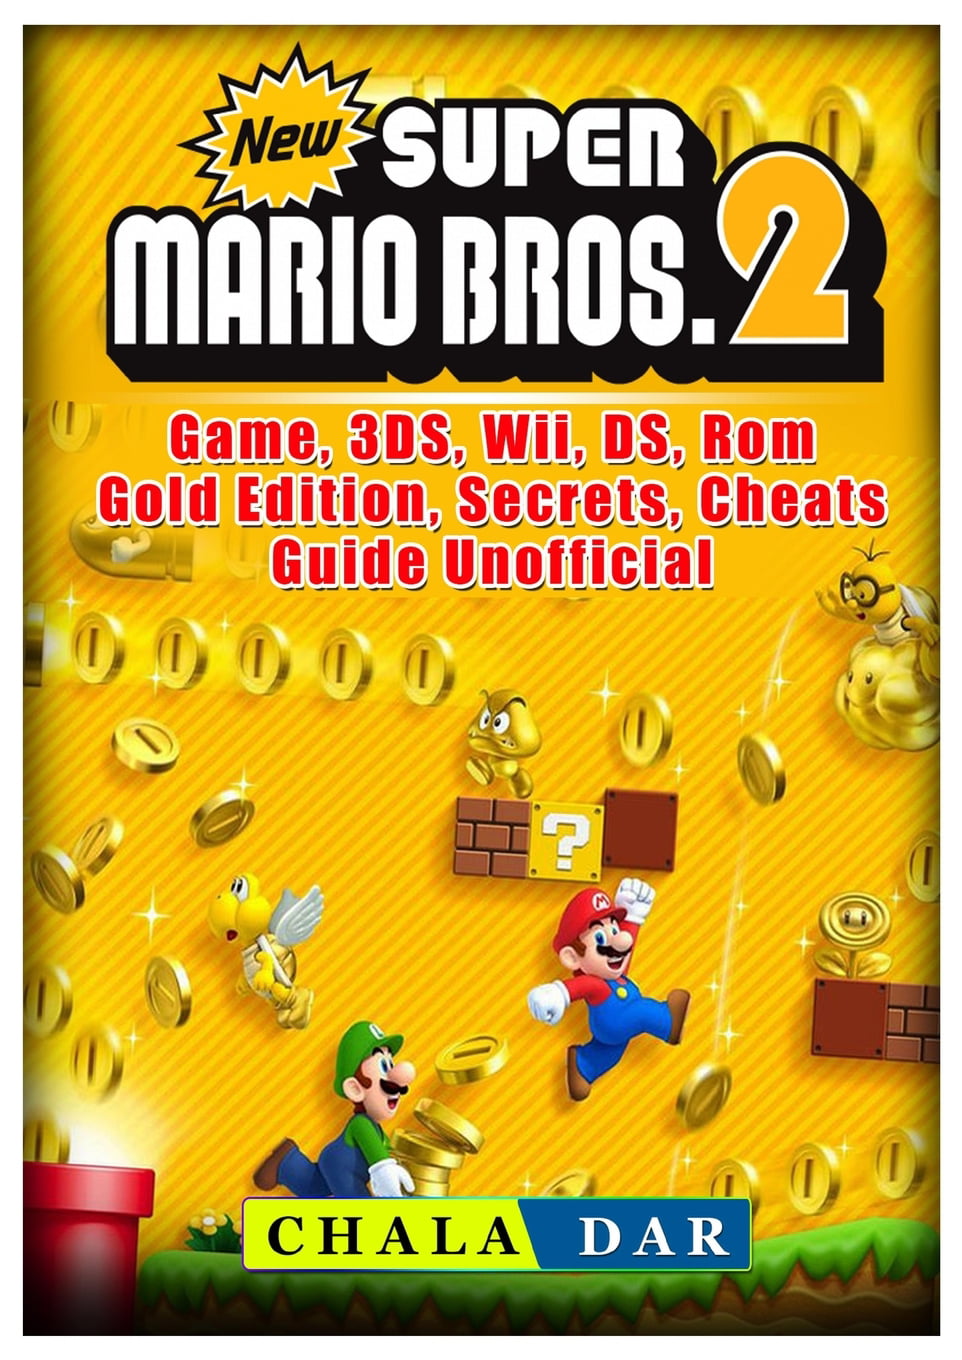 New Super Mario Bros 2 Game, 3DS, Wii, Rom, Gold Edition, Secrets, Guide Unofficial - Walmart.com